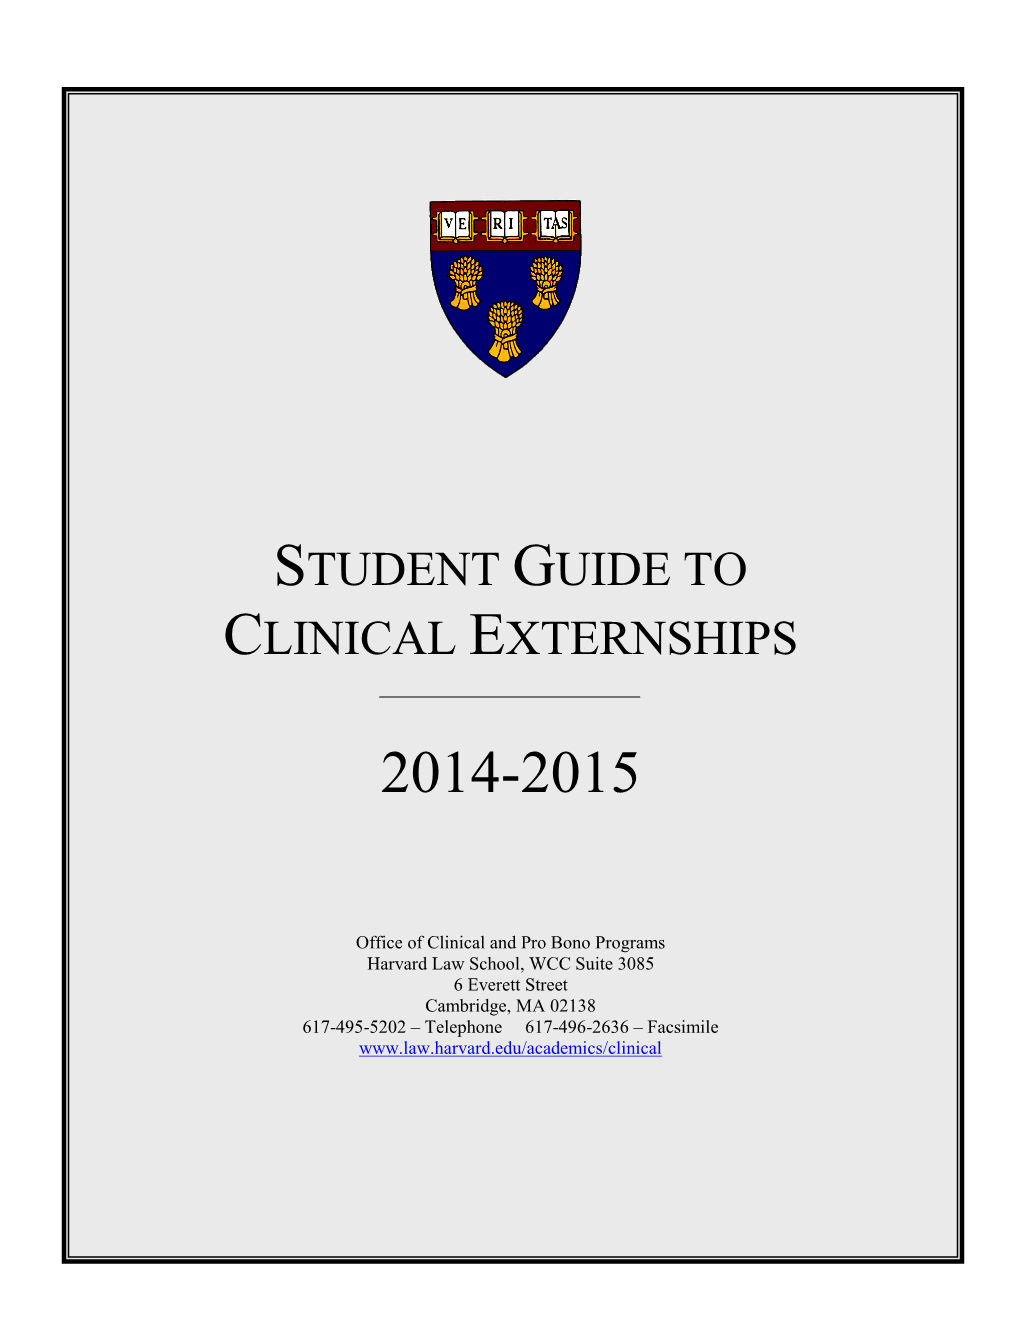 Student Guide to Clinical Externships 2014-2015